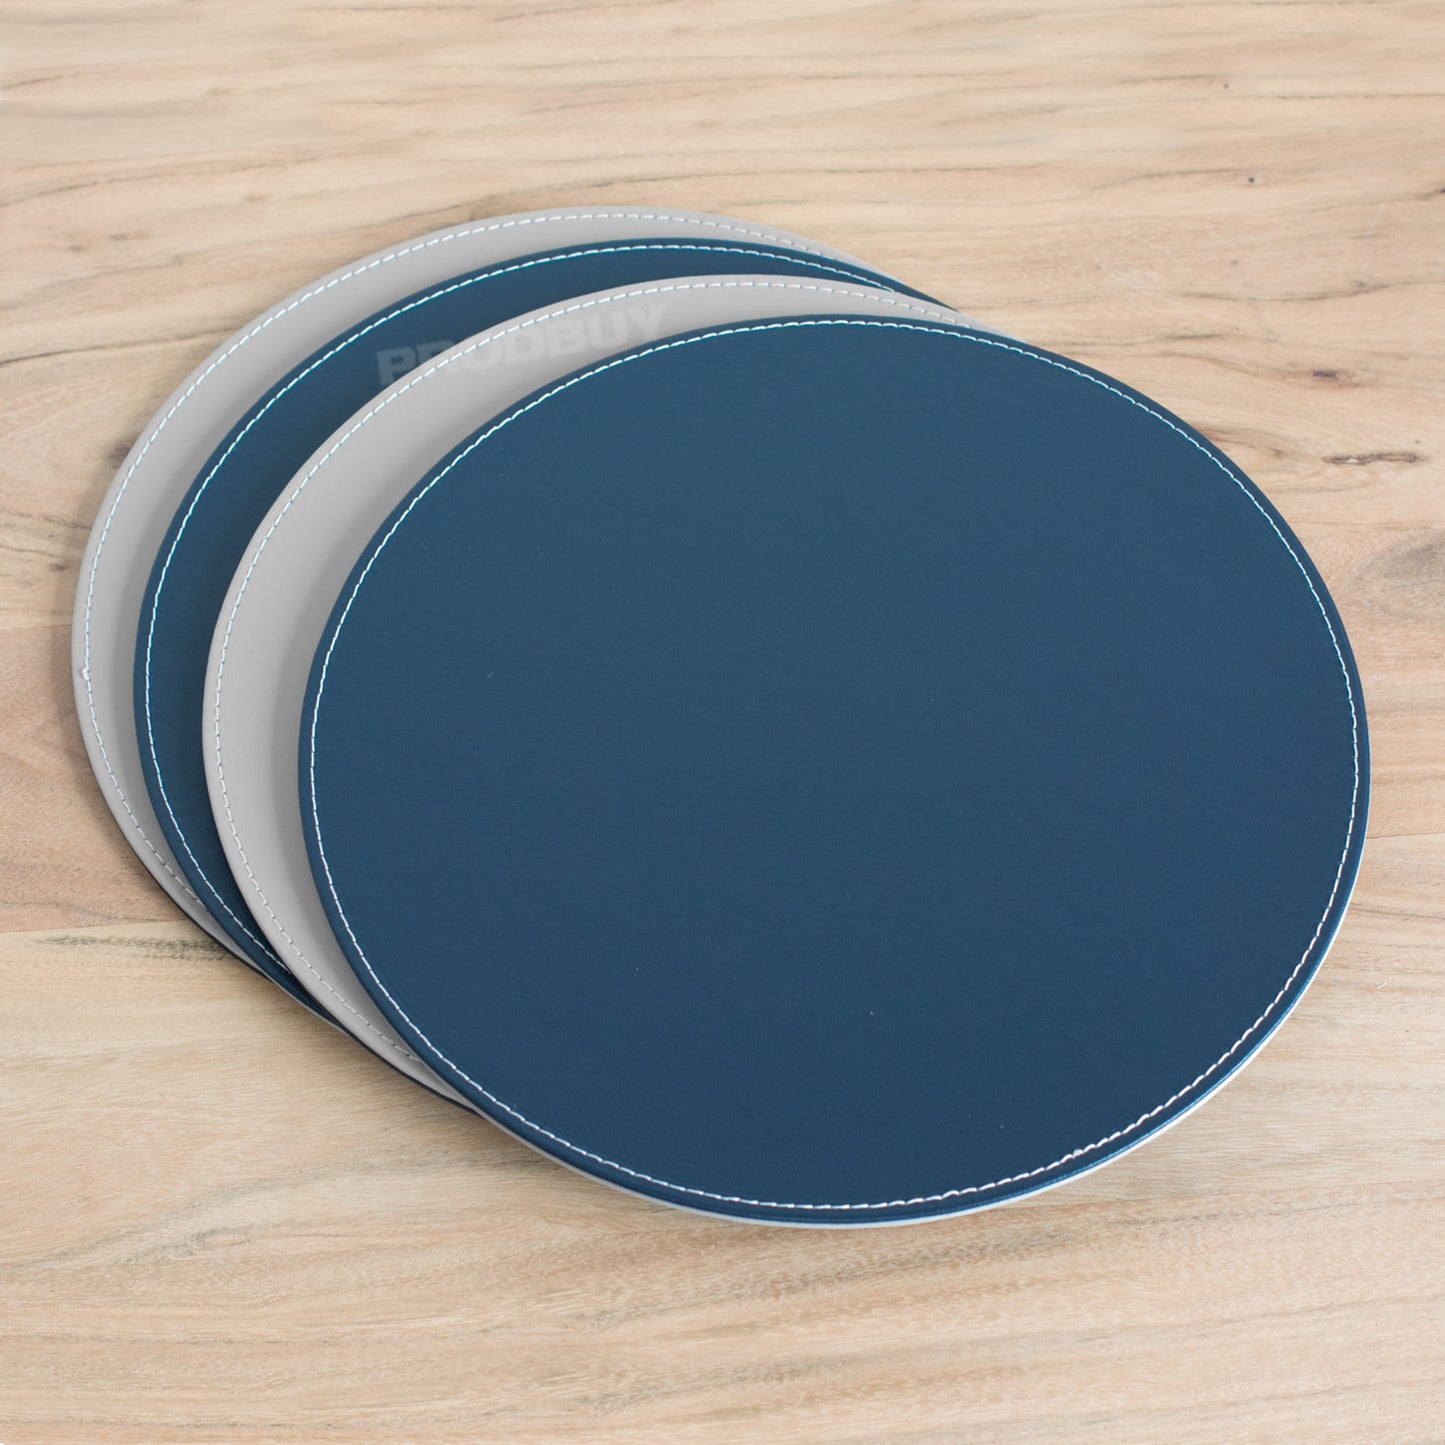 Set of 4 Reversible Grey & Navy Blue Faux Leather Placemats